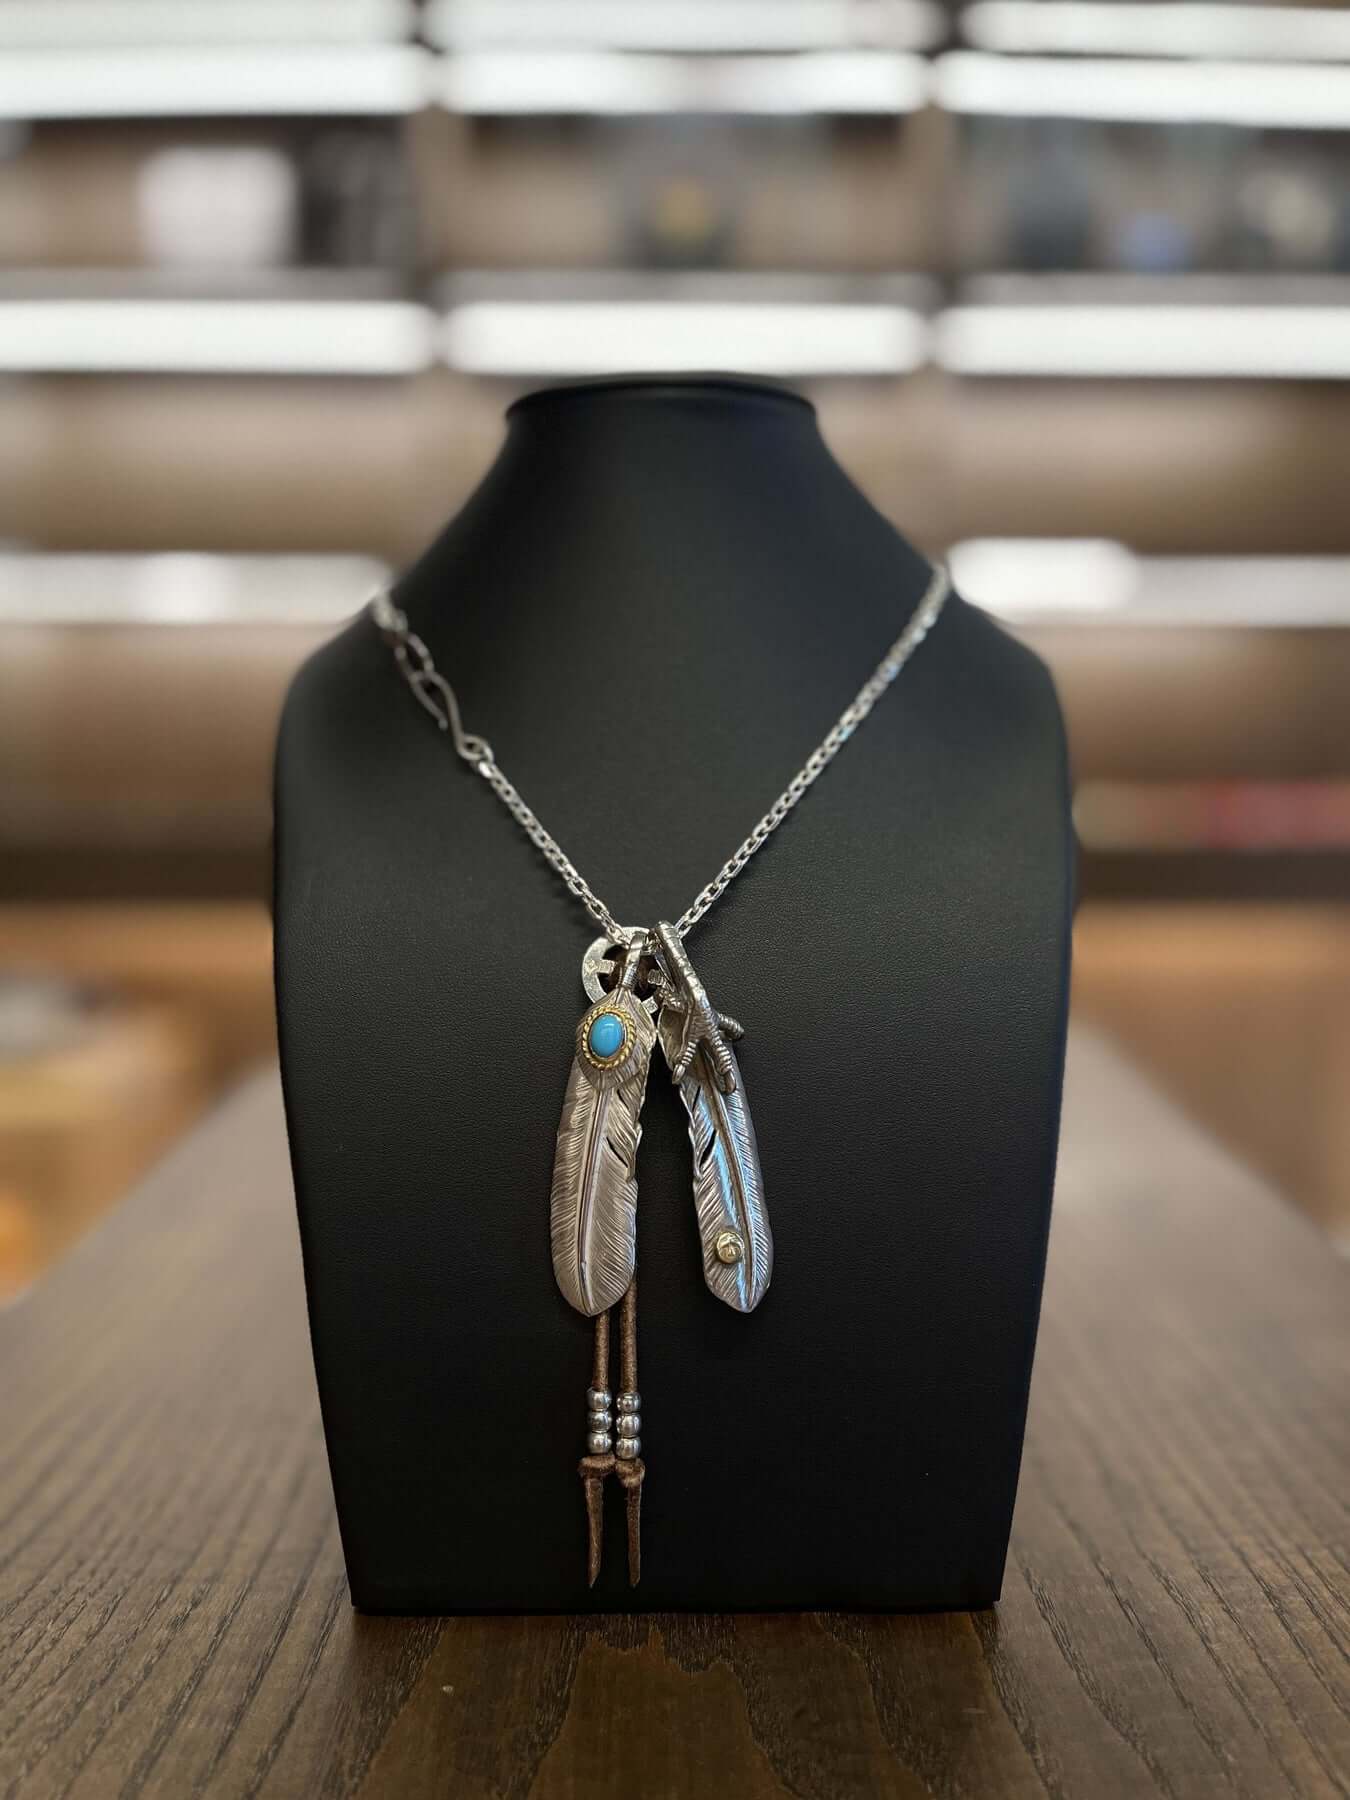 Native Feather JP | Buy New and Authentic Goro's Jewelry